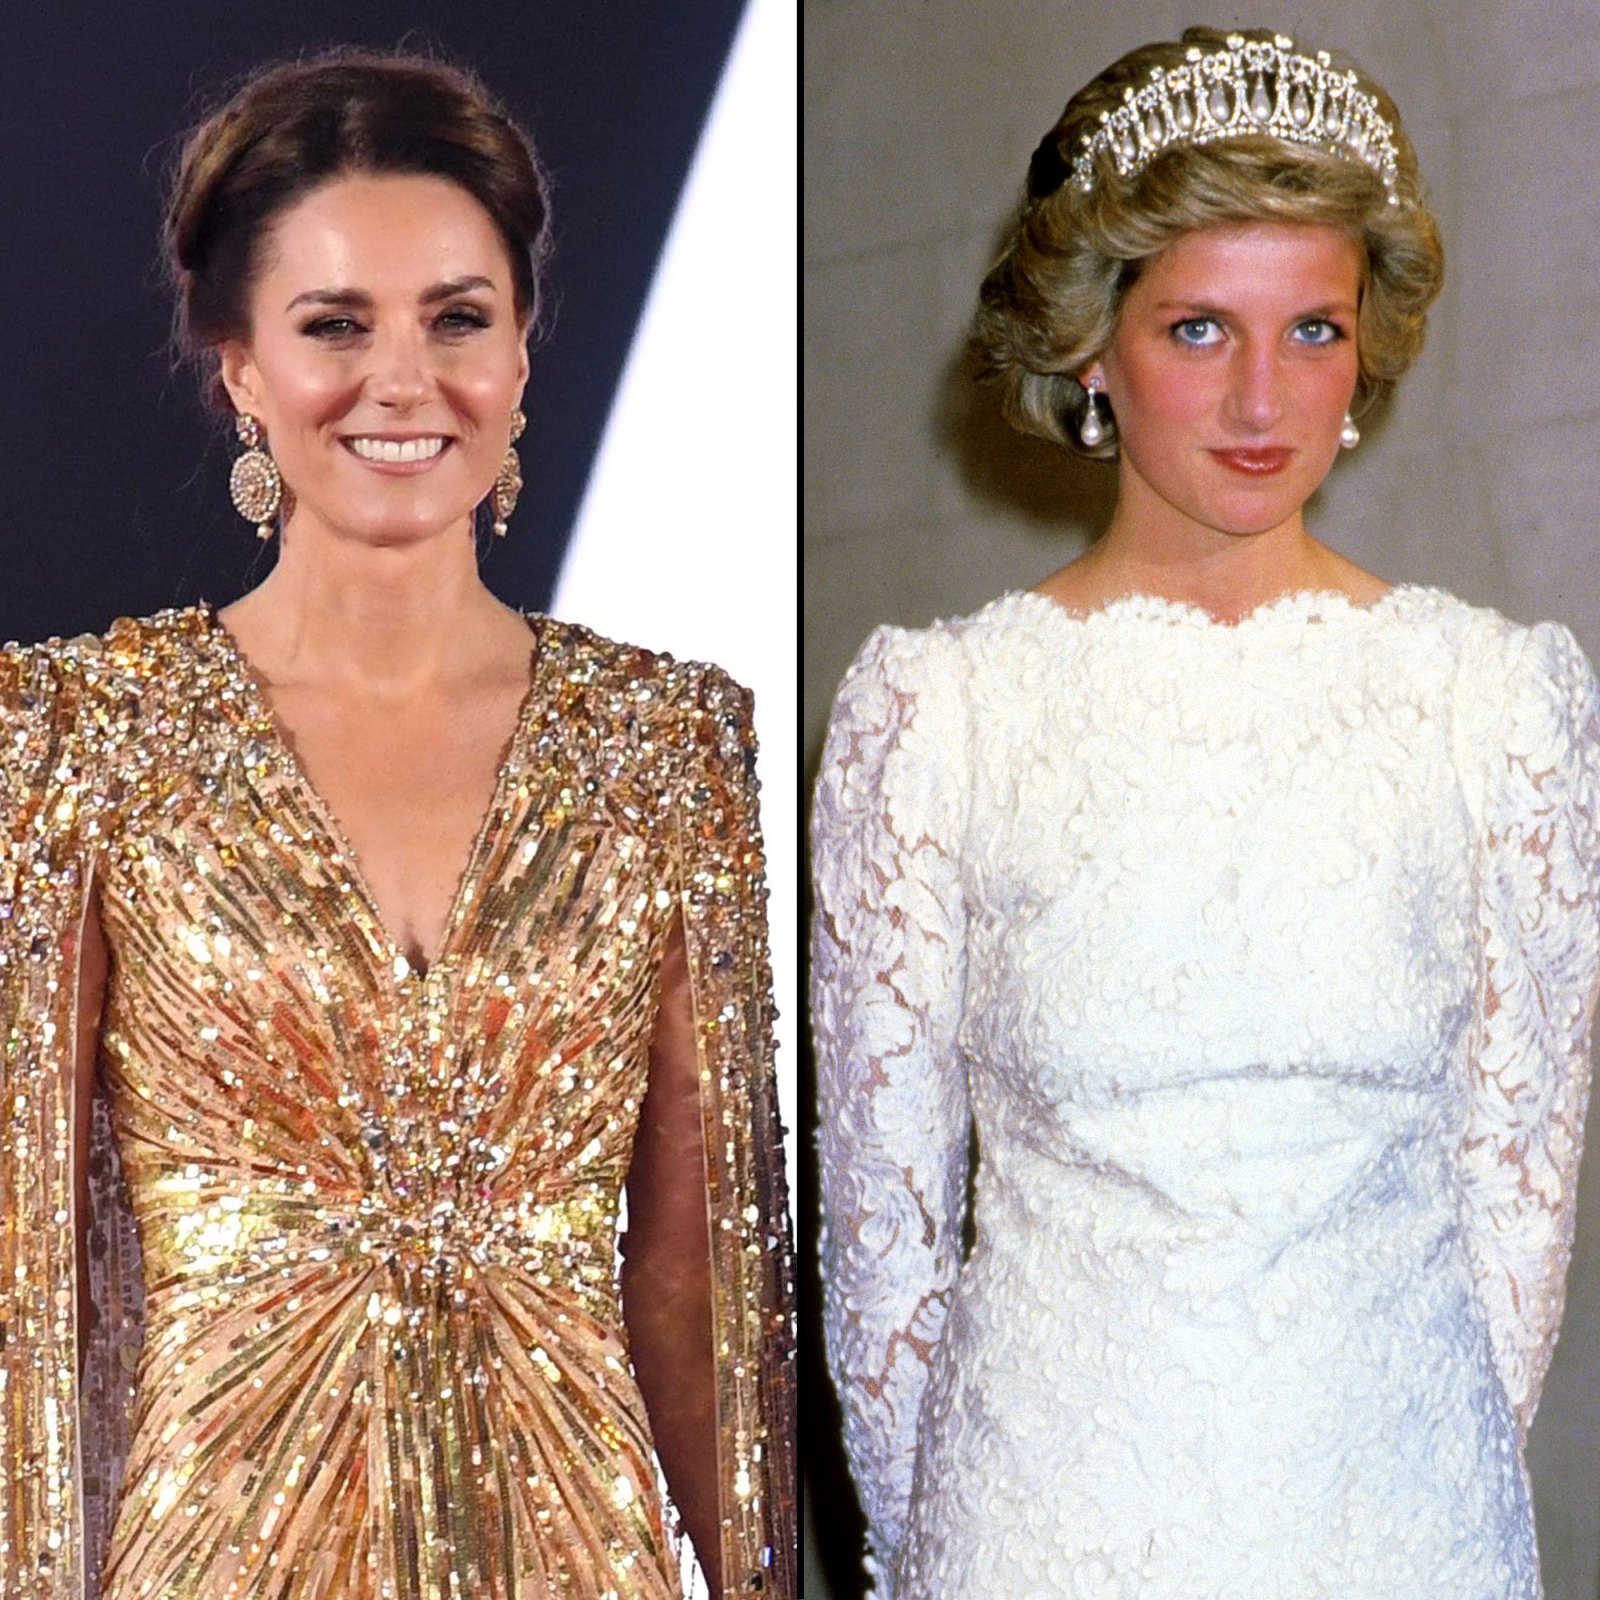 Kate Middleton Will Be Princess of Wales Queen's Death